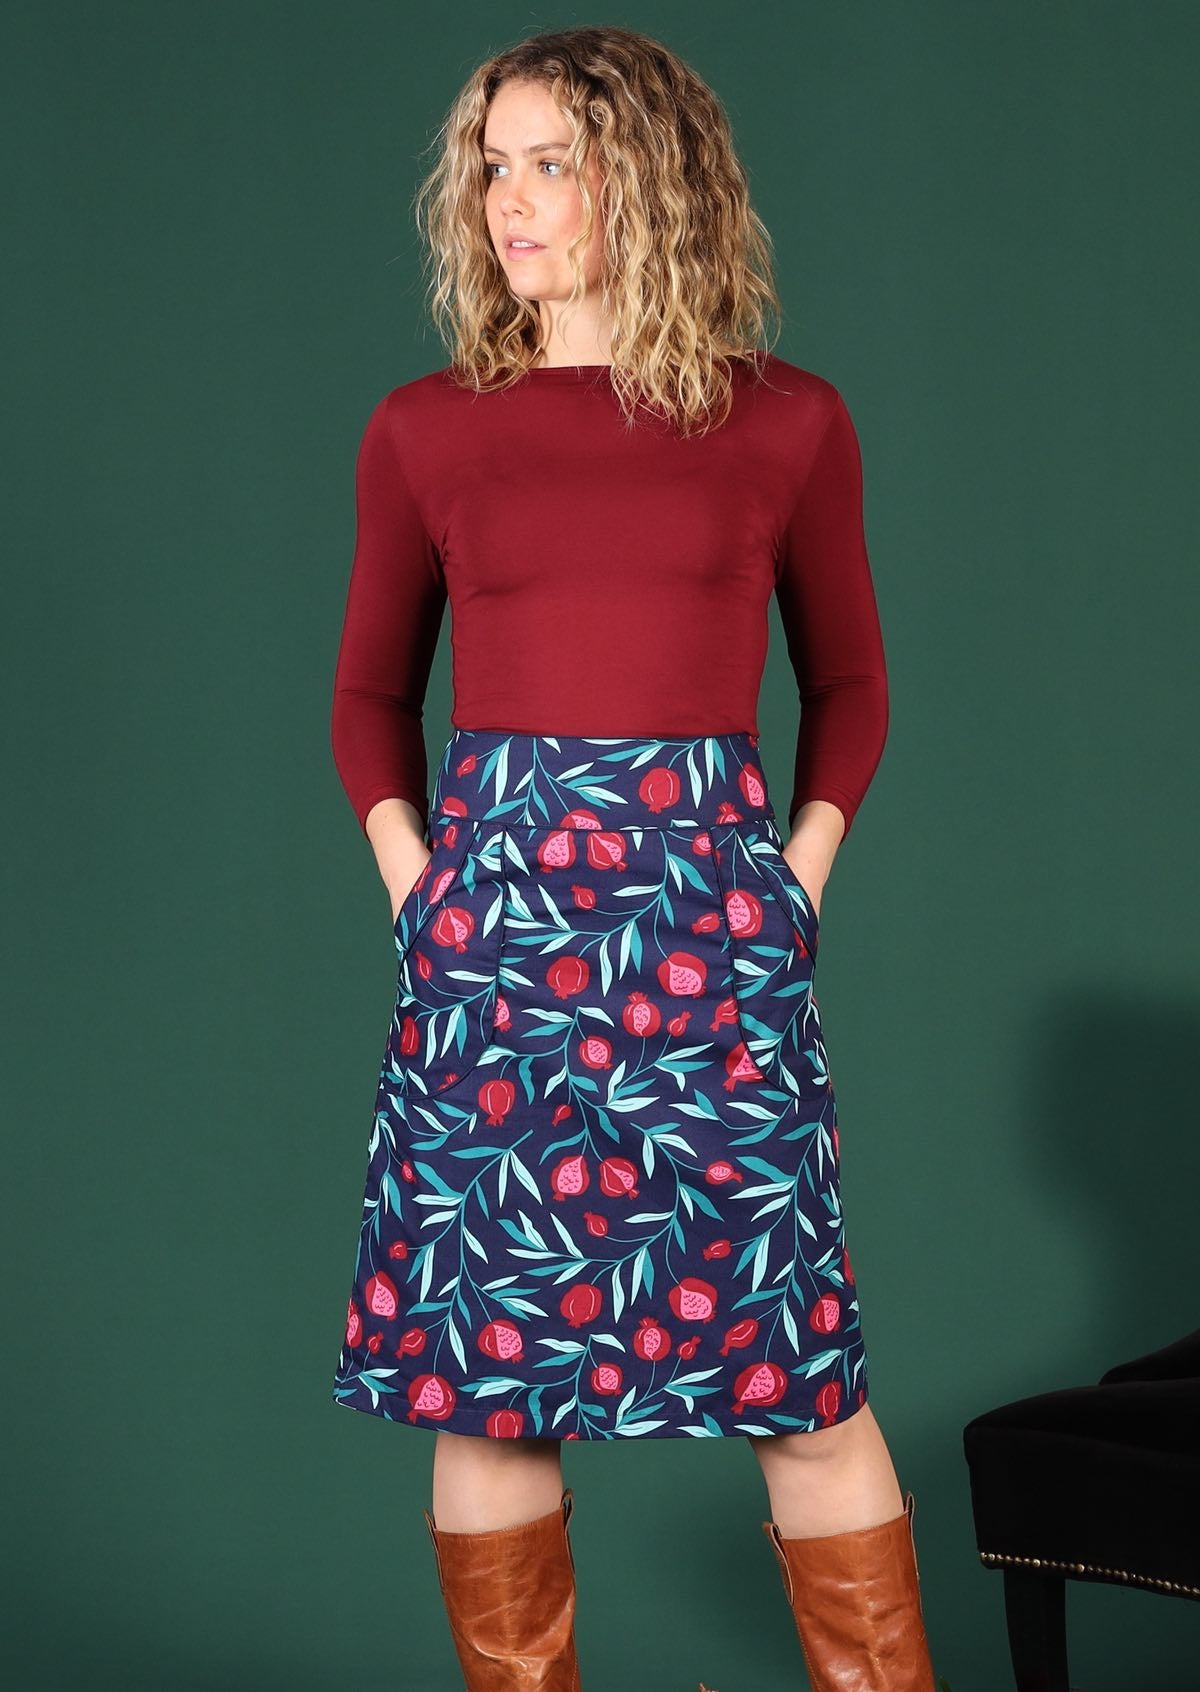 Model wears 100% cotton mid length retro skirt in a blue based pomegranate print featuring piped detail pockets 